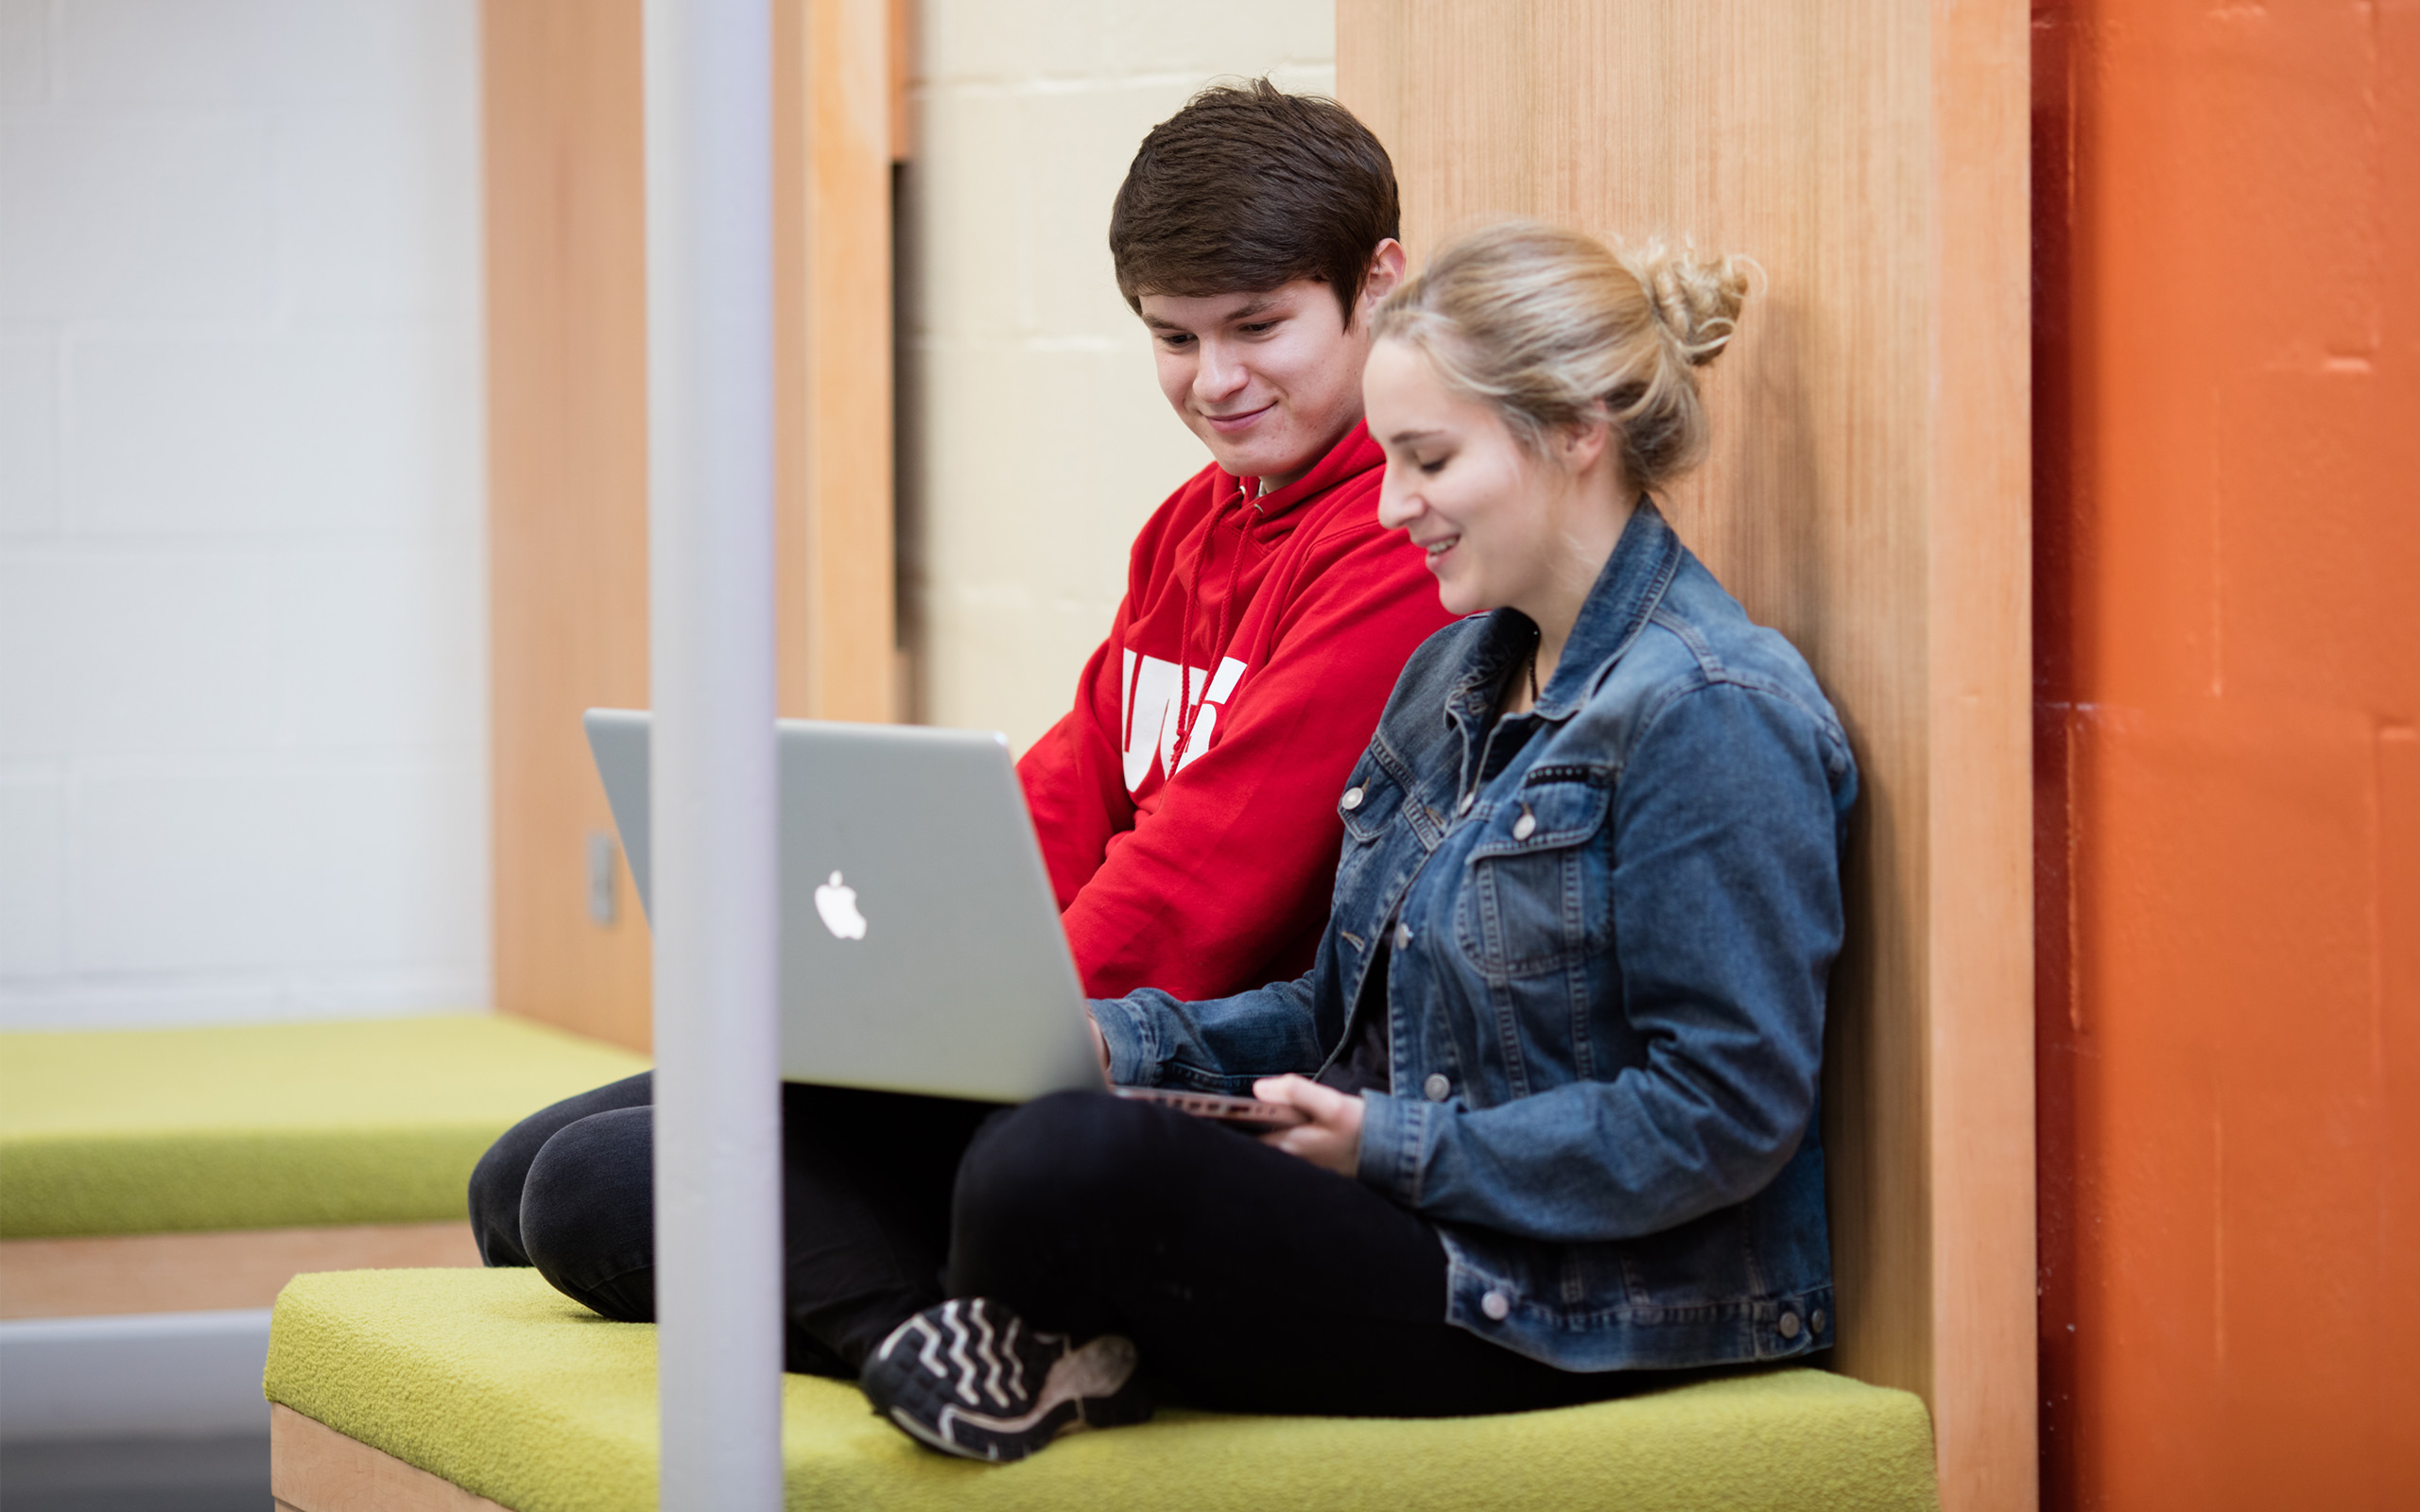 Two students studying at Paisley campus